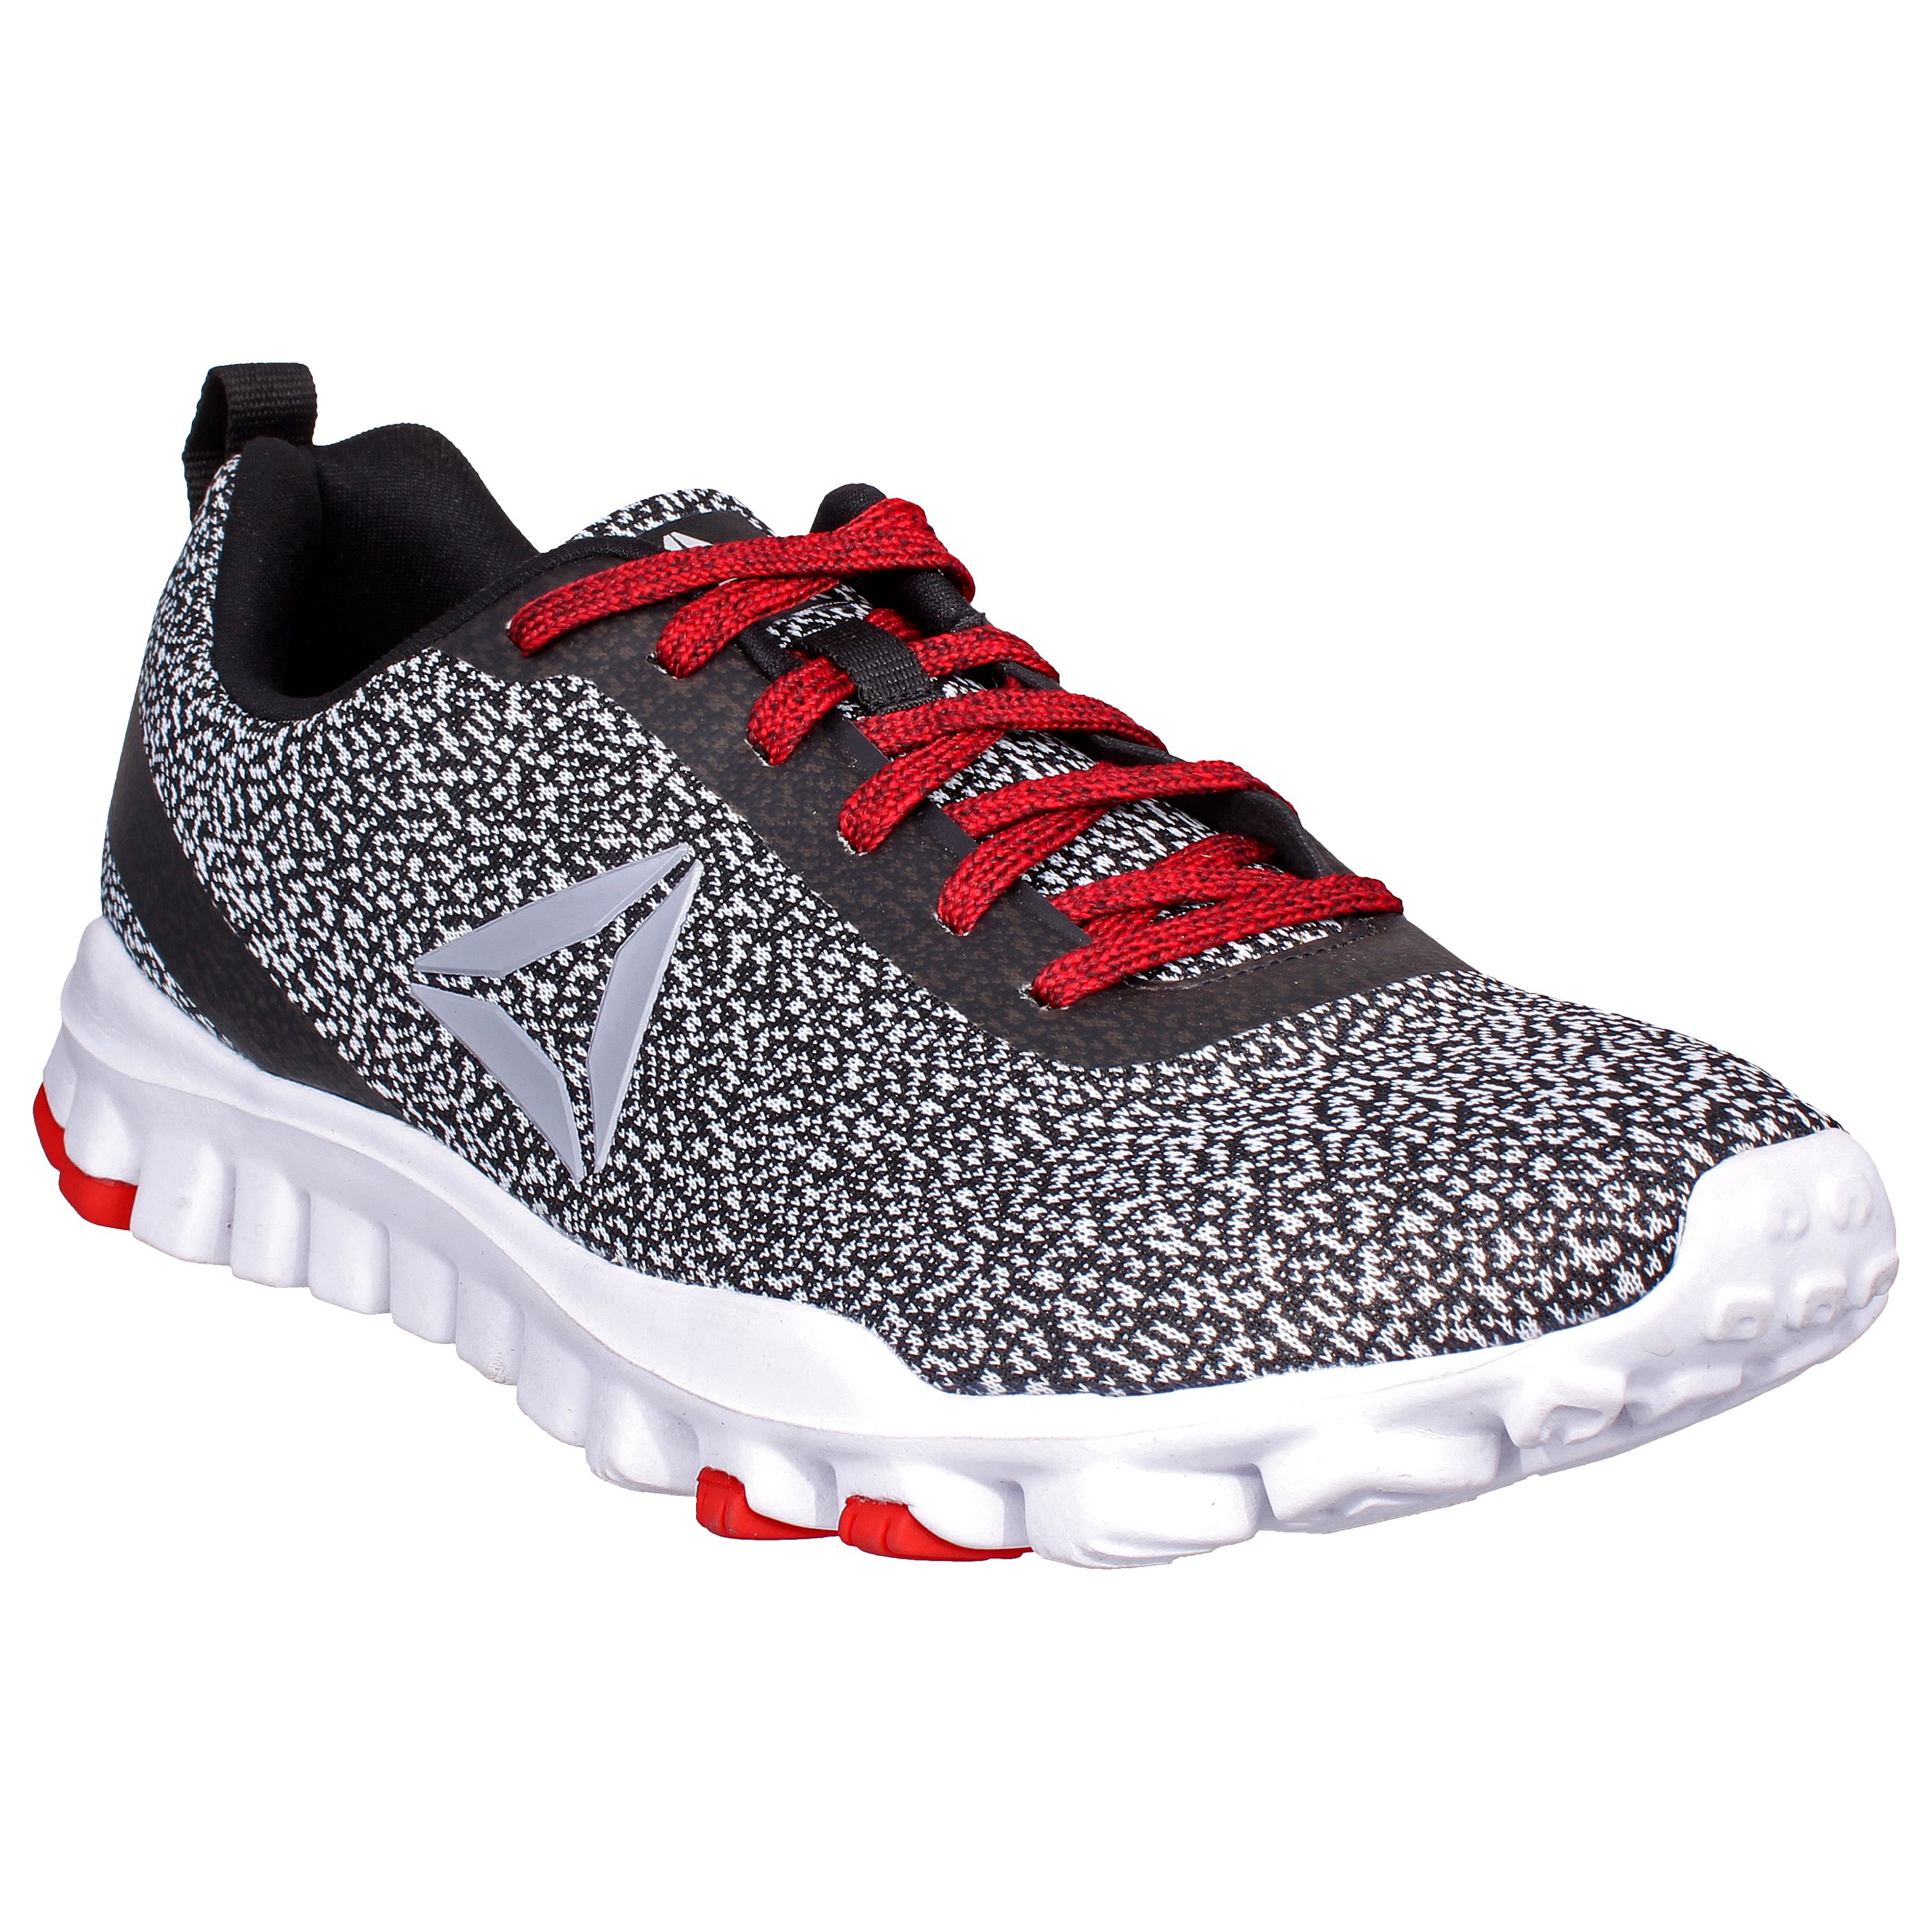 reebok sports shoes at lowest price